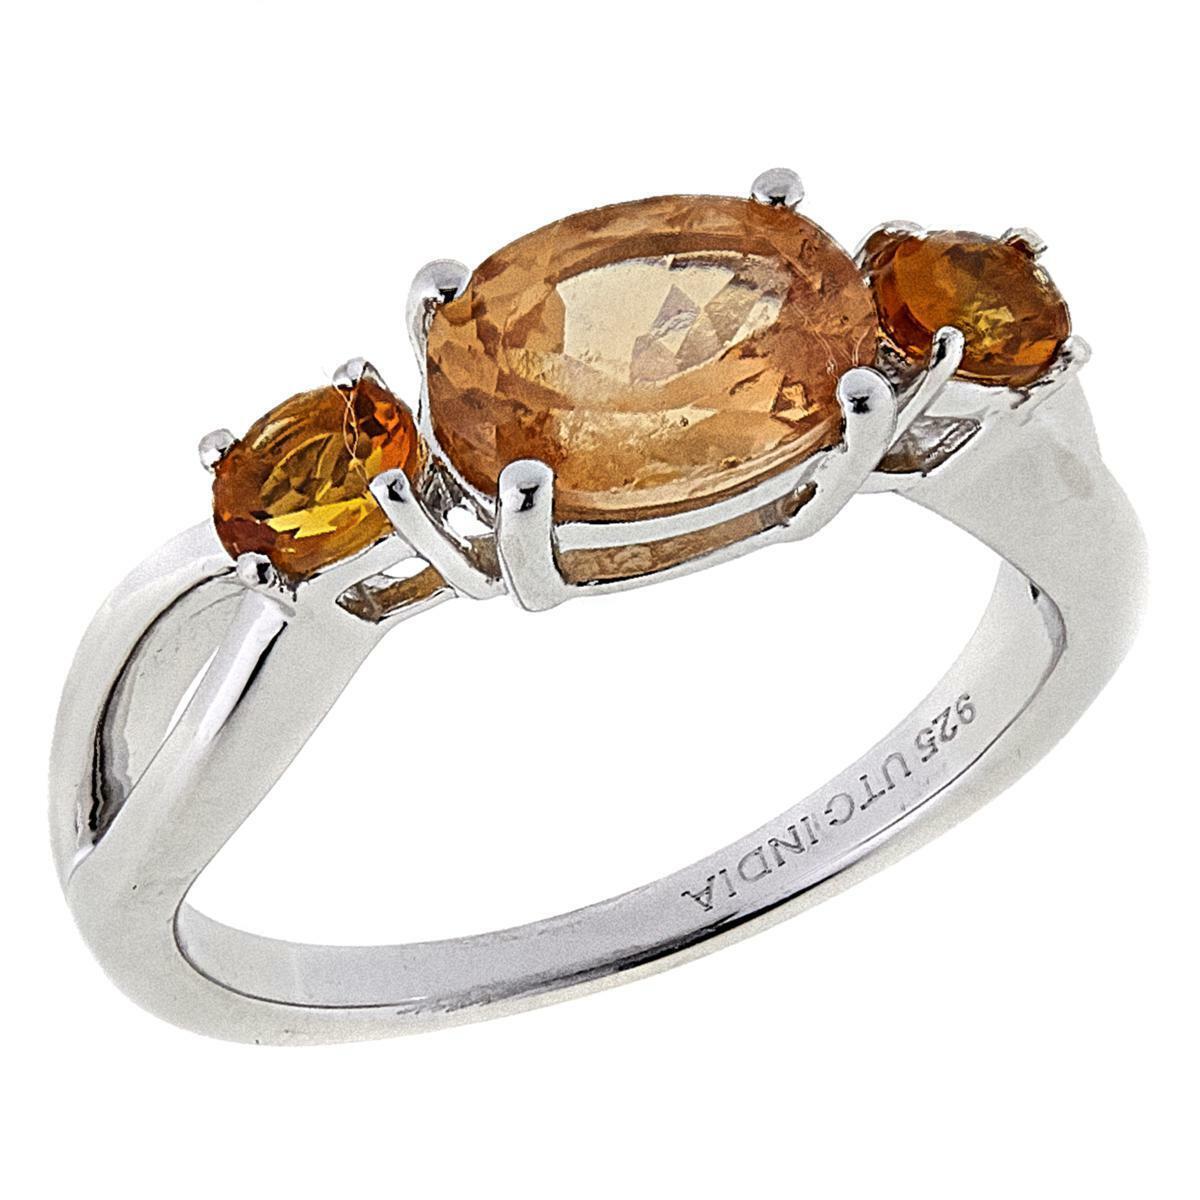 Paul Deasy Gems 3-Stone Oval Hessonite Sterling Silver Ring Size 8 HSN $130